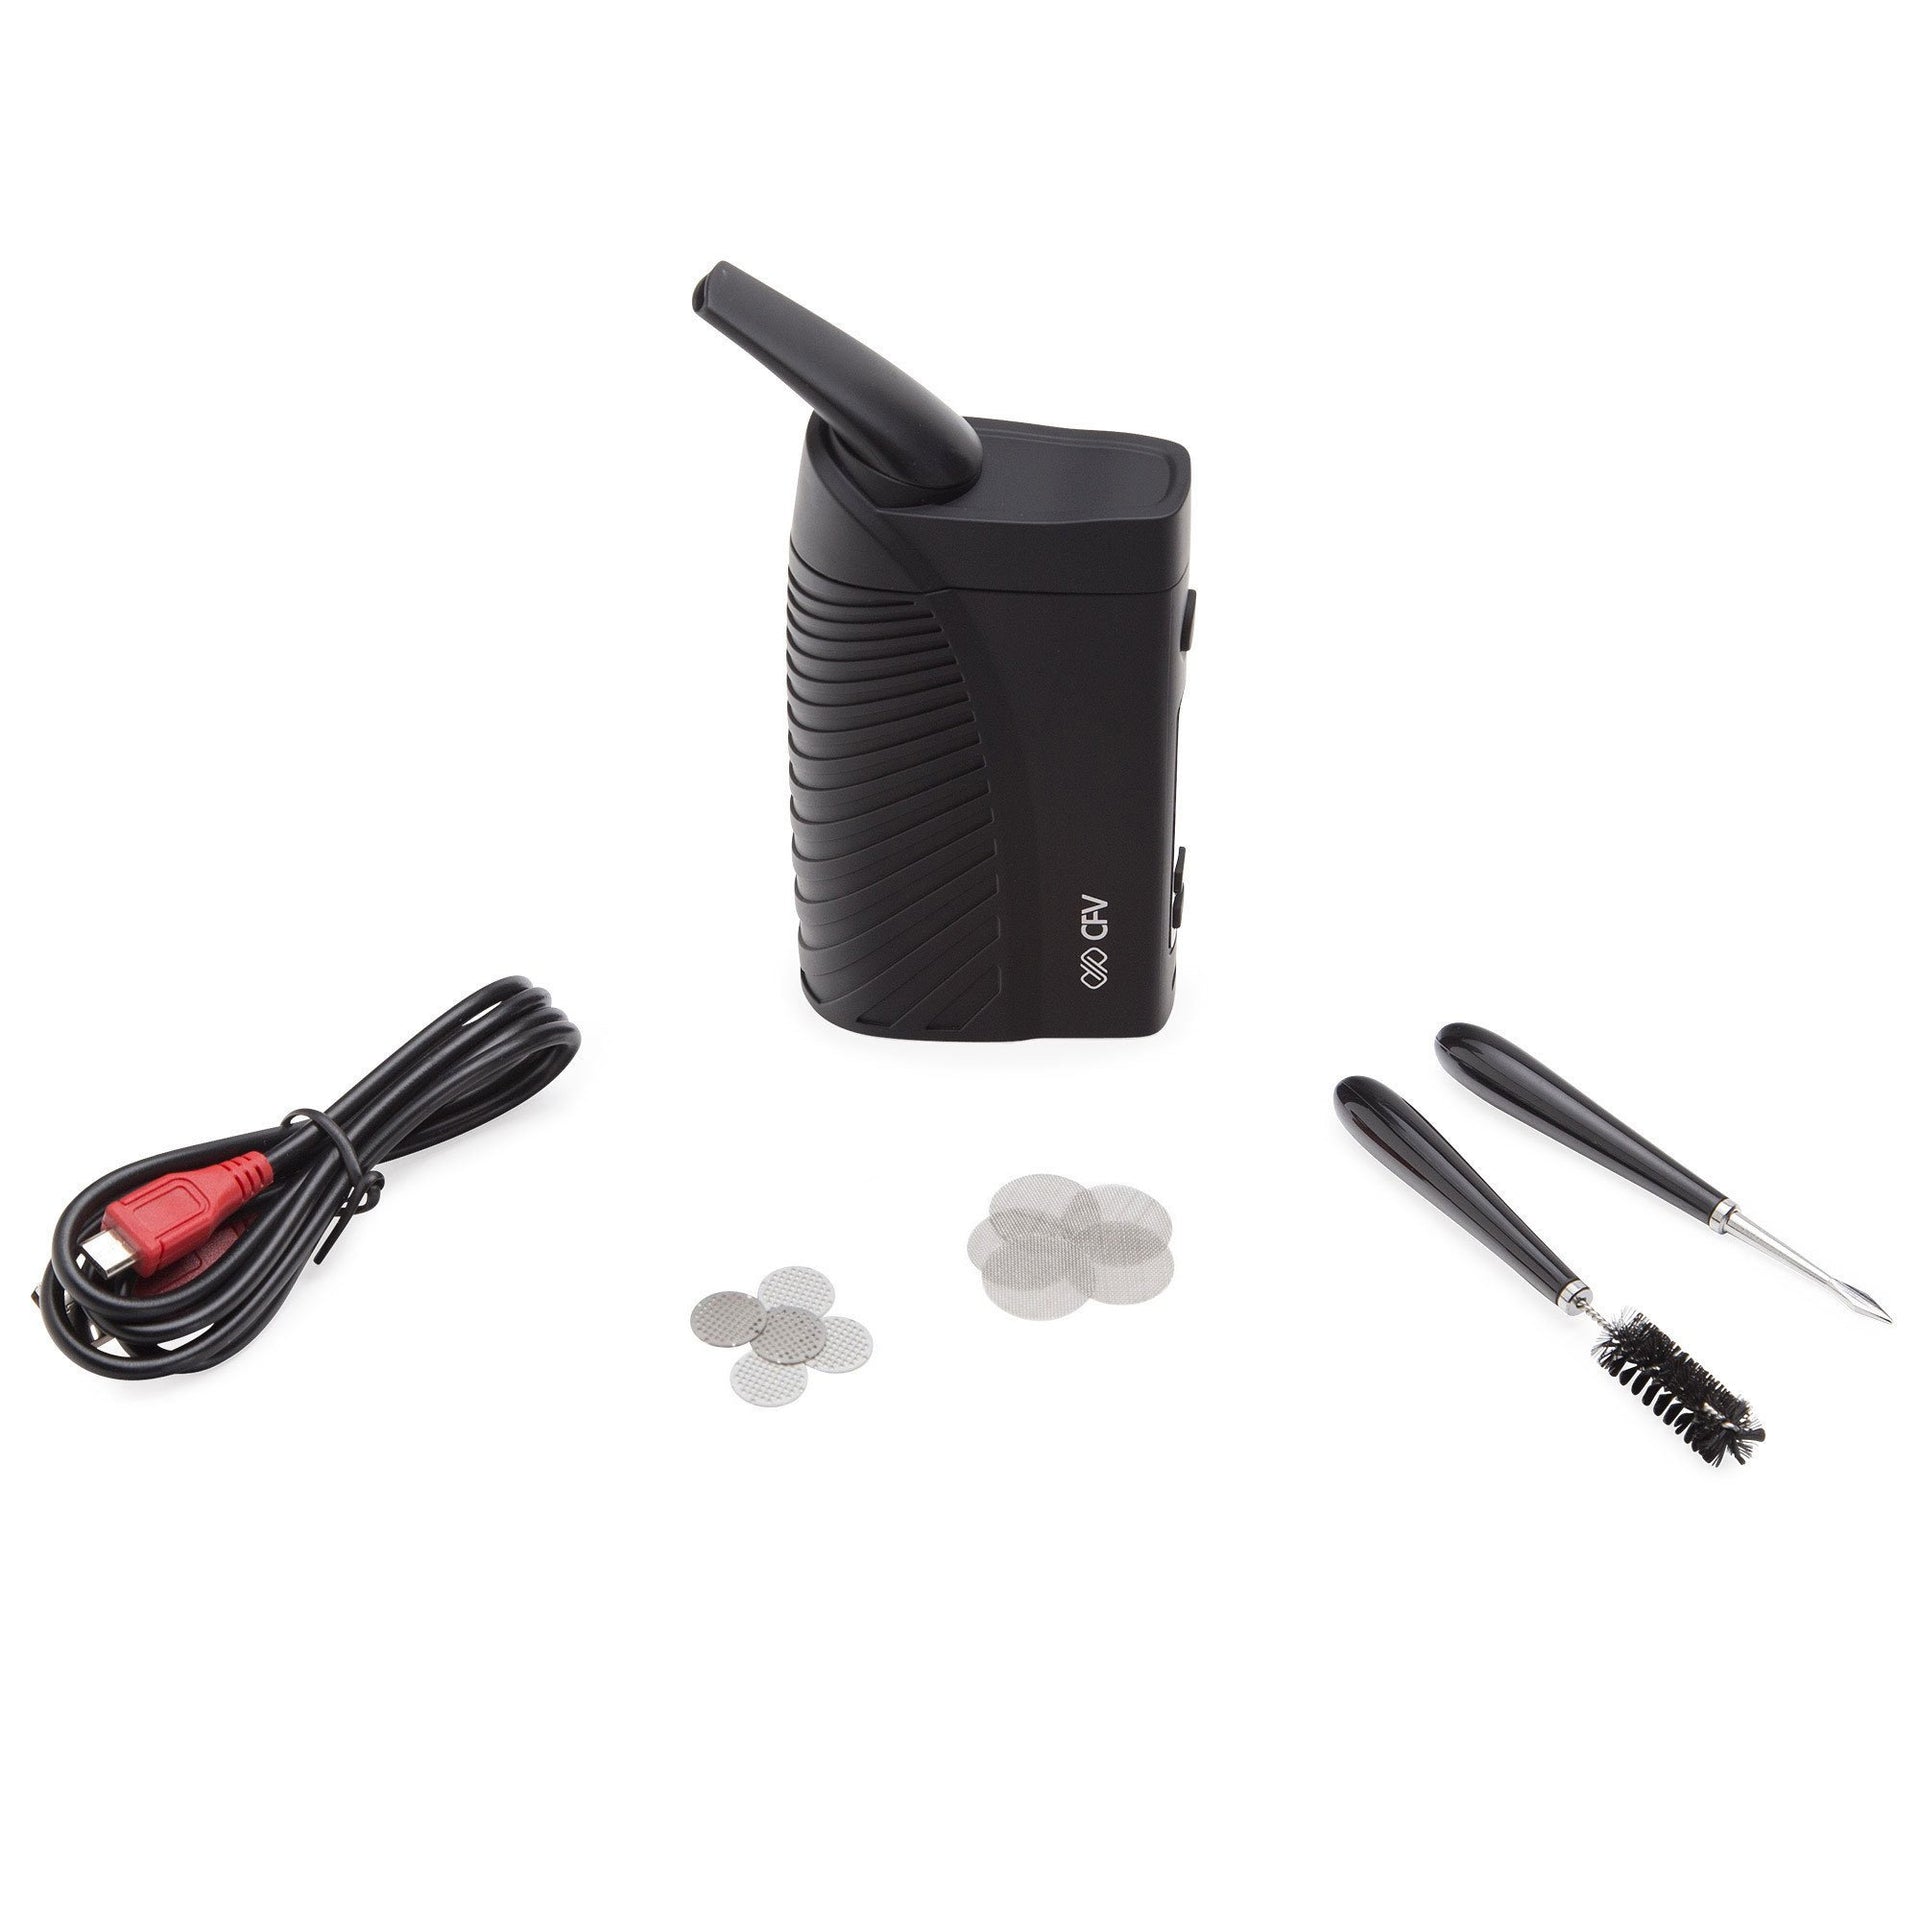 Boundless CFV Vaporizer - Black - 420 Science - The most trusted online smoke shop.